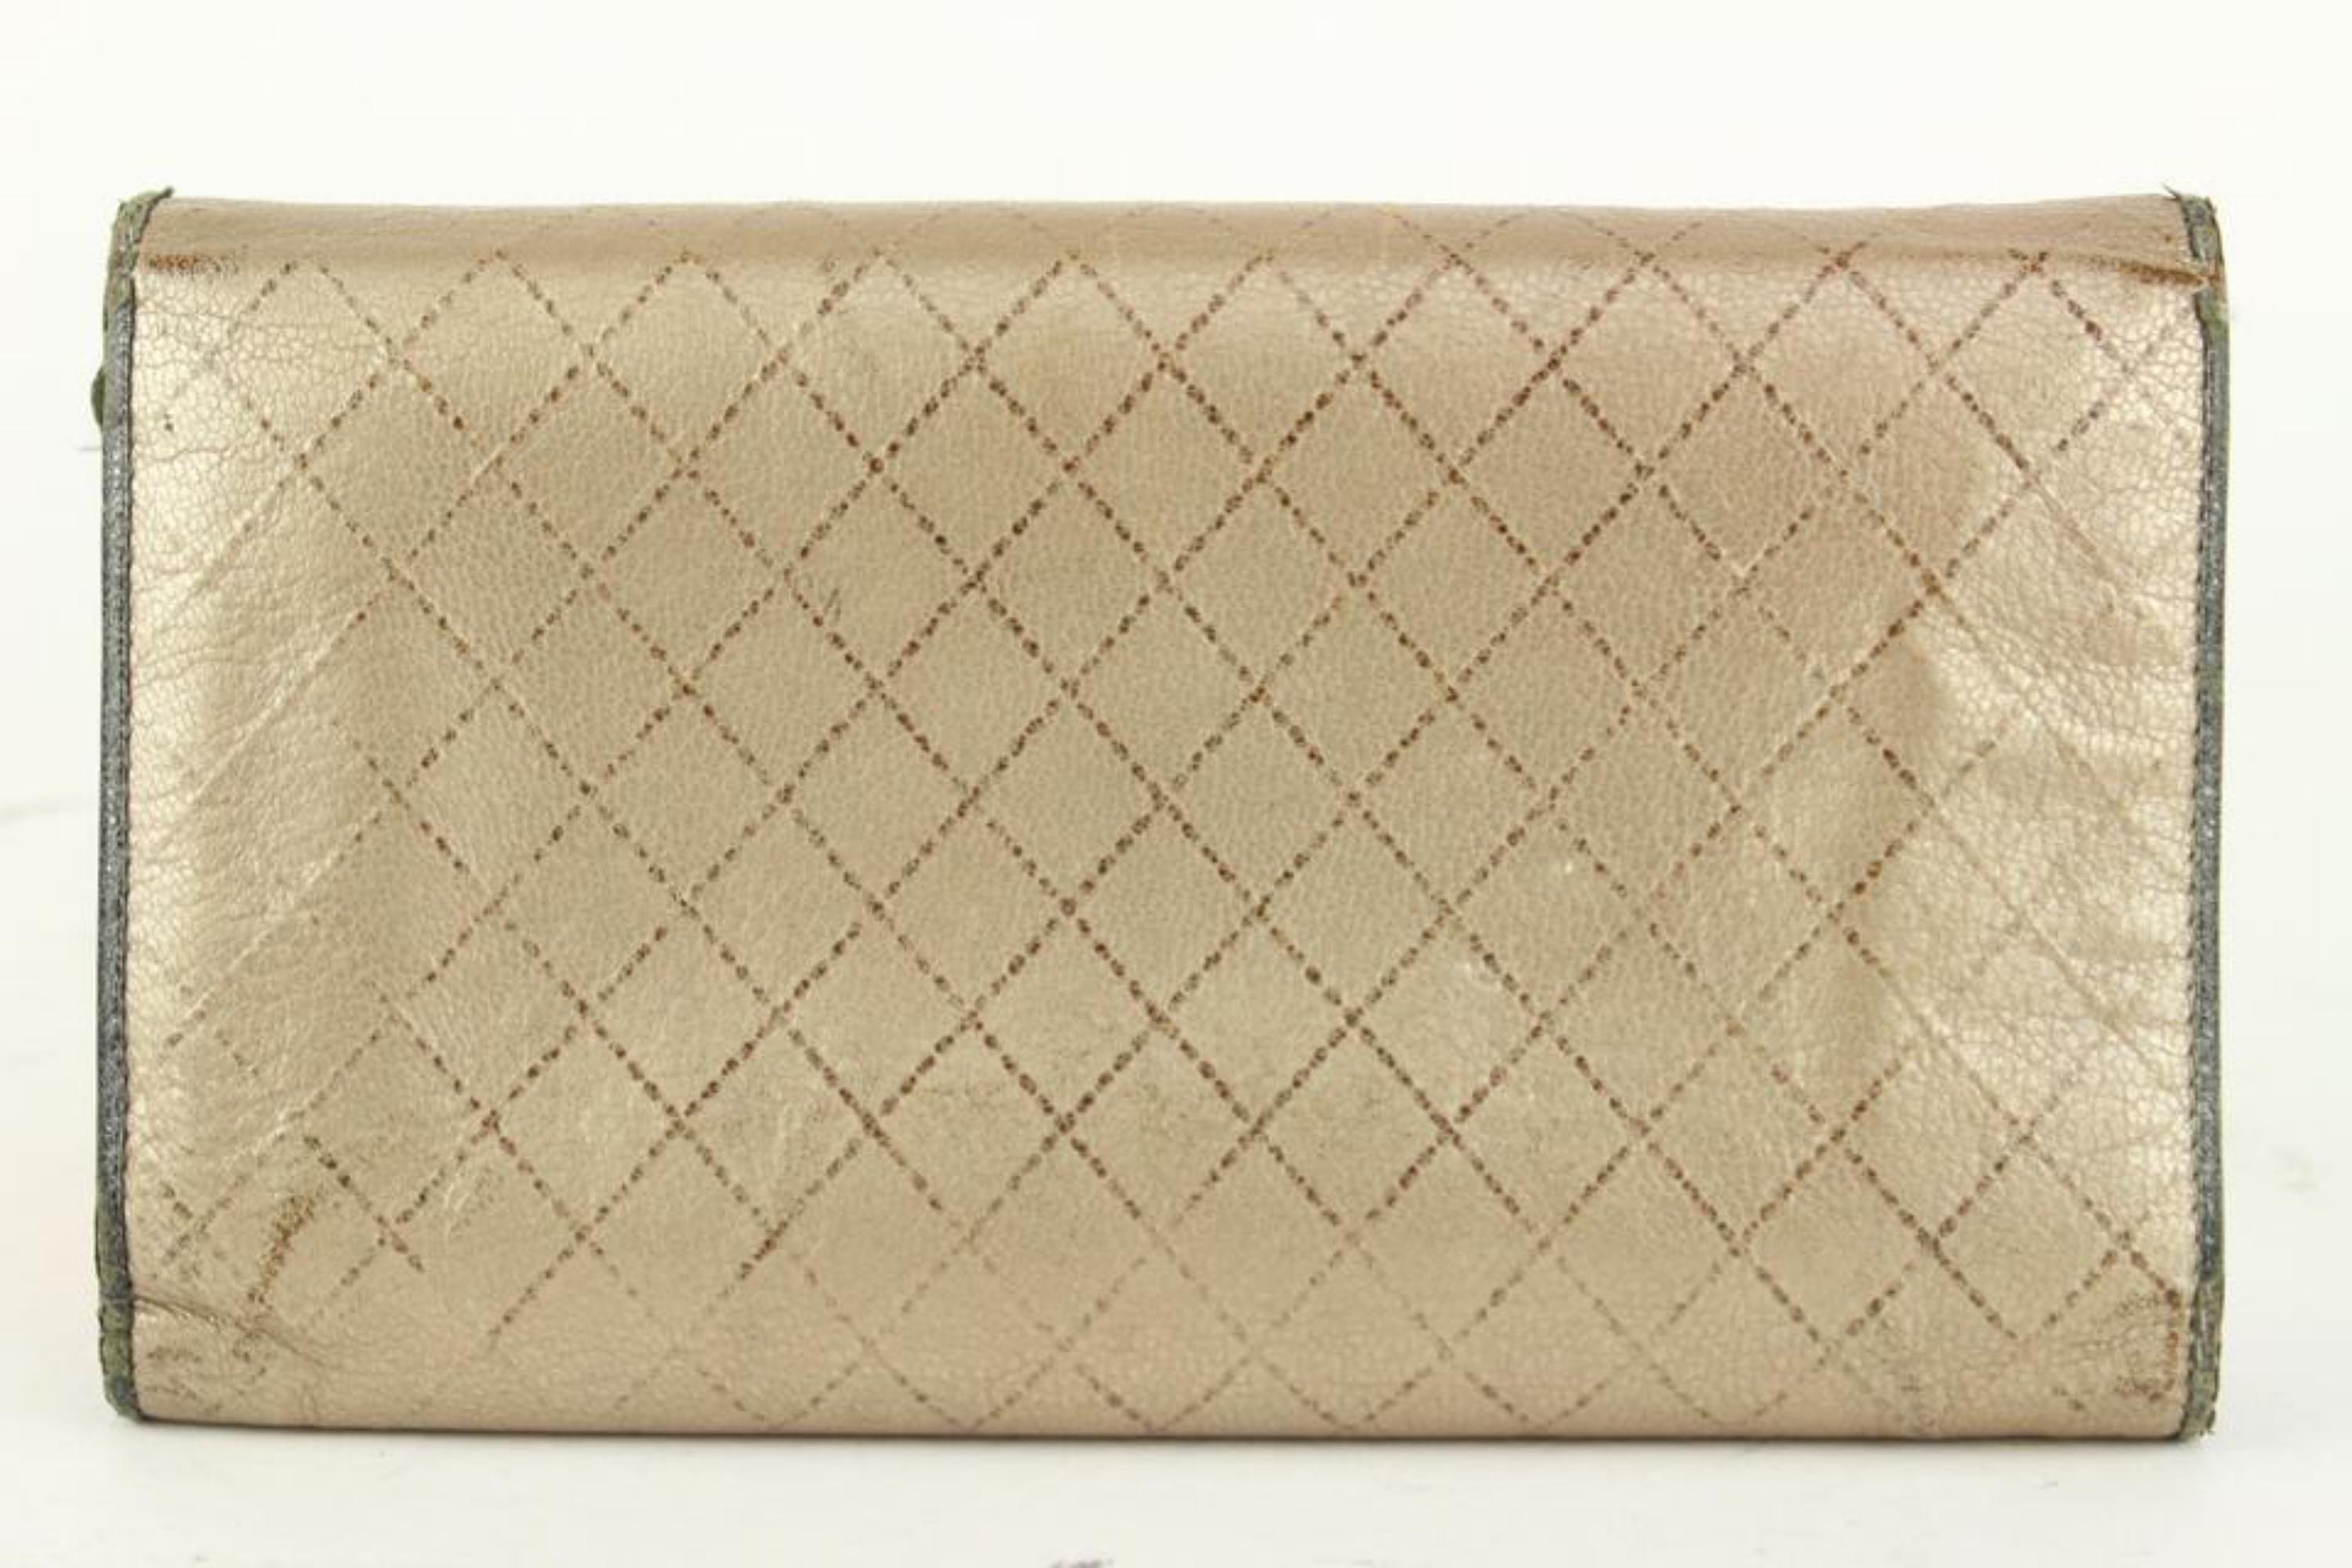 Chanel Gold Quilted Leather CC Logo Wallet 10CC929 In Fair Condition For Sale In Dix hills, NY